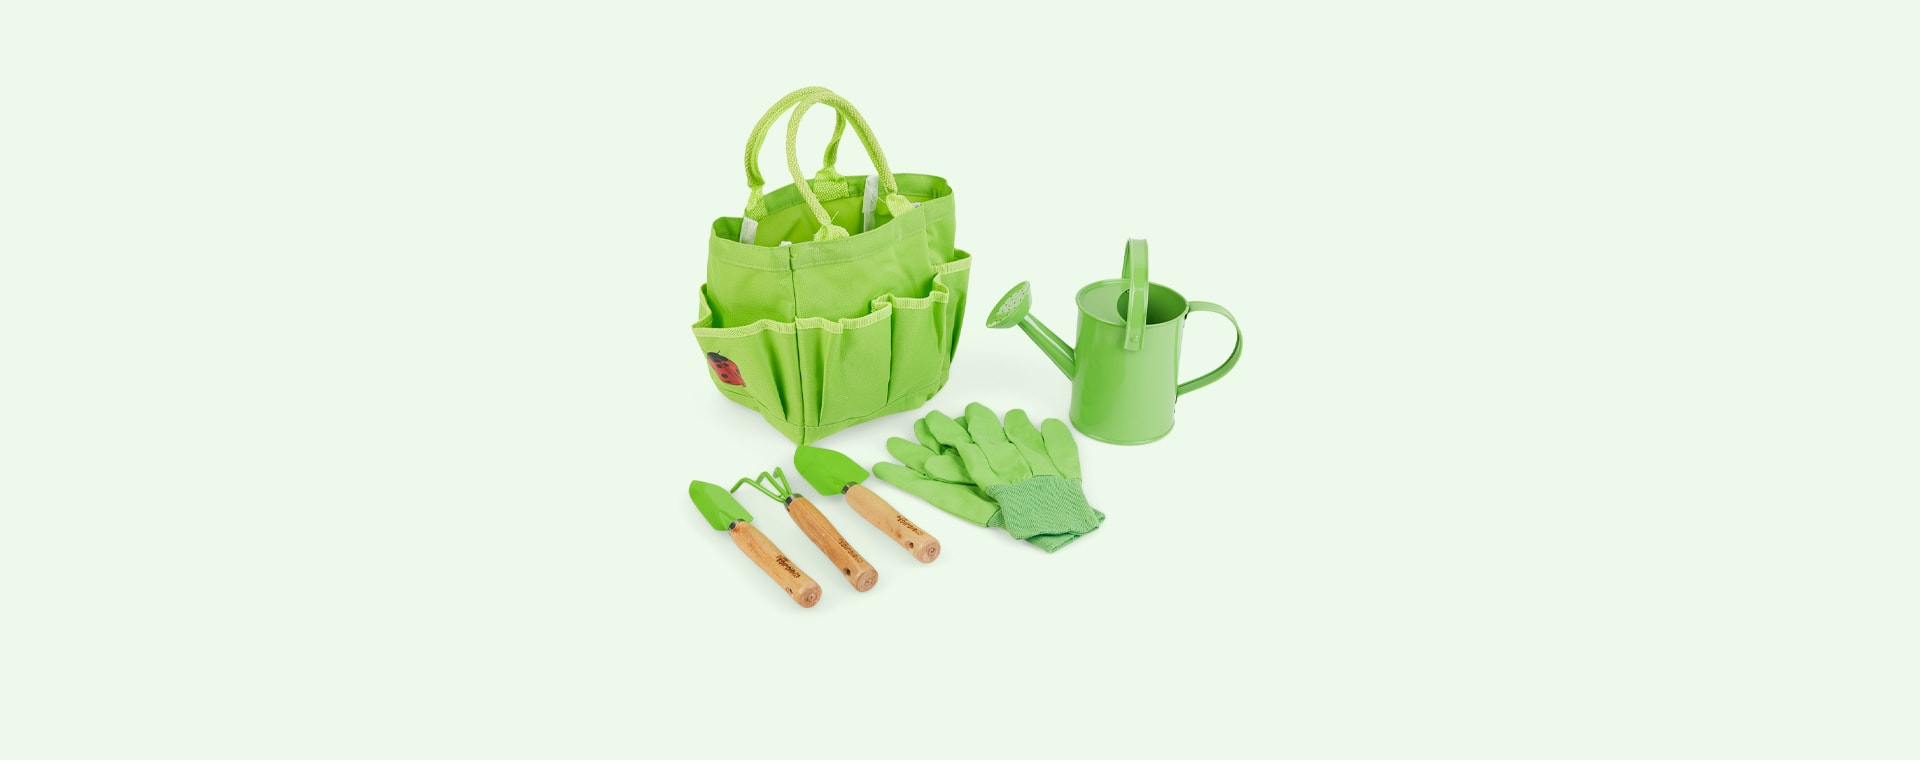 Green Bigjigs Small Tote Bag with Tools